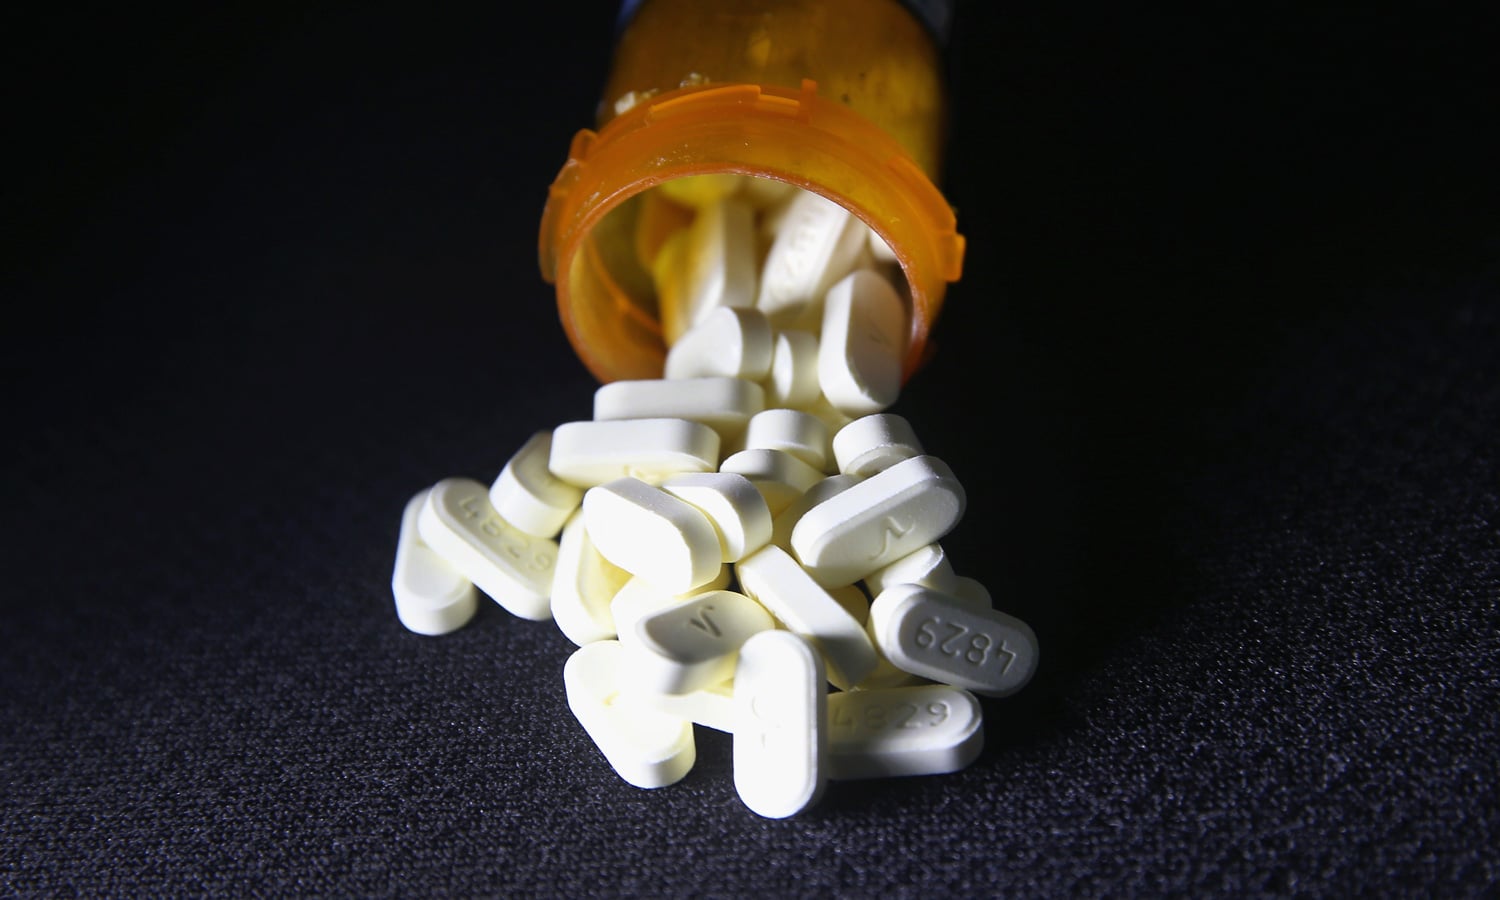 Risk Factors For Opioid Overdoses Same For Teenagers As Adults, Study Finds